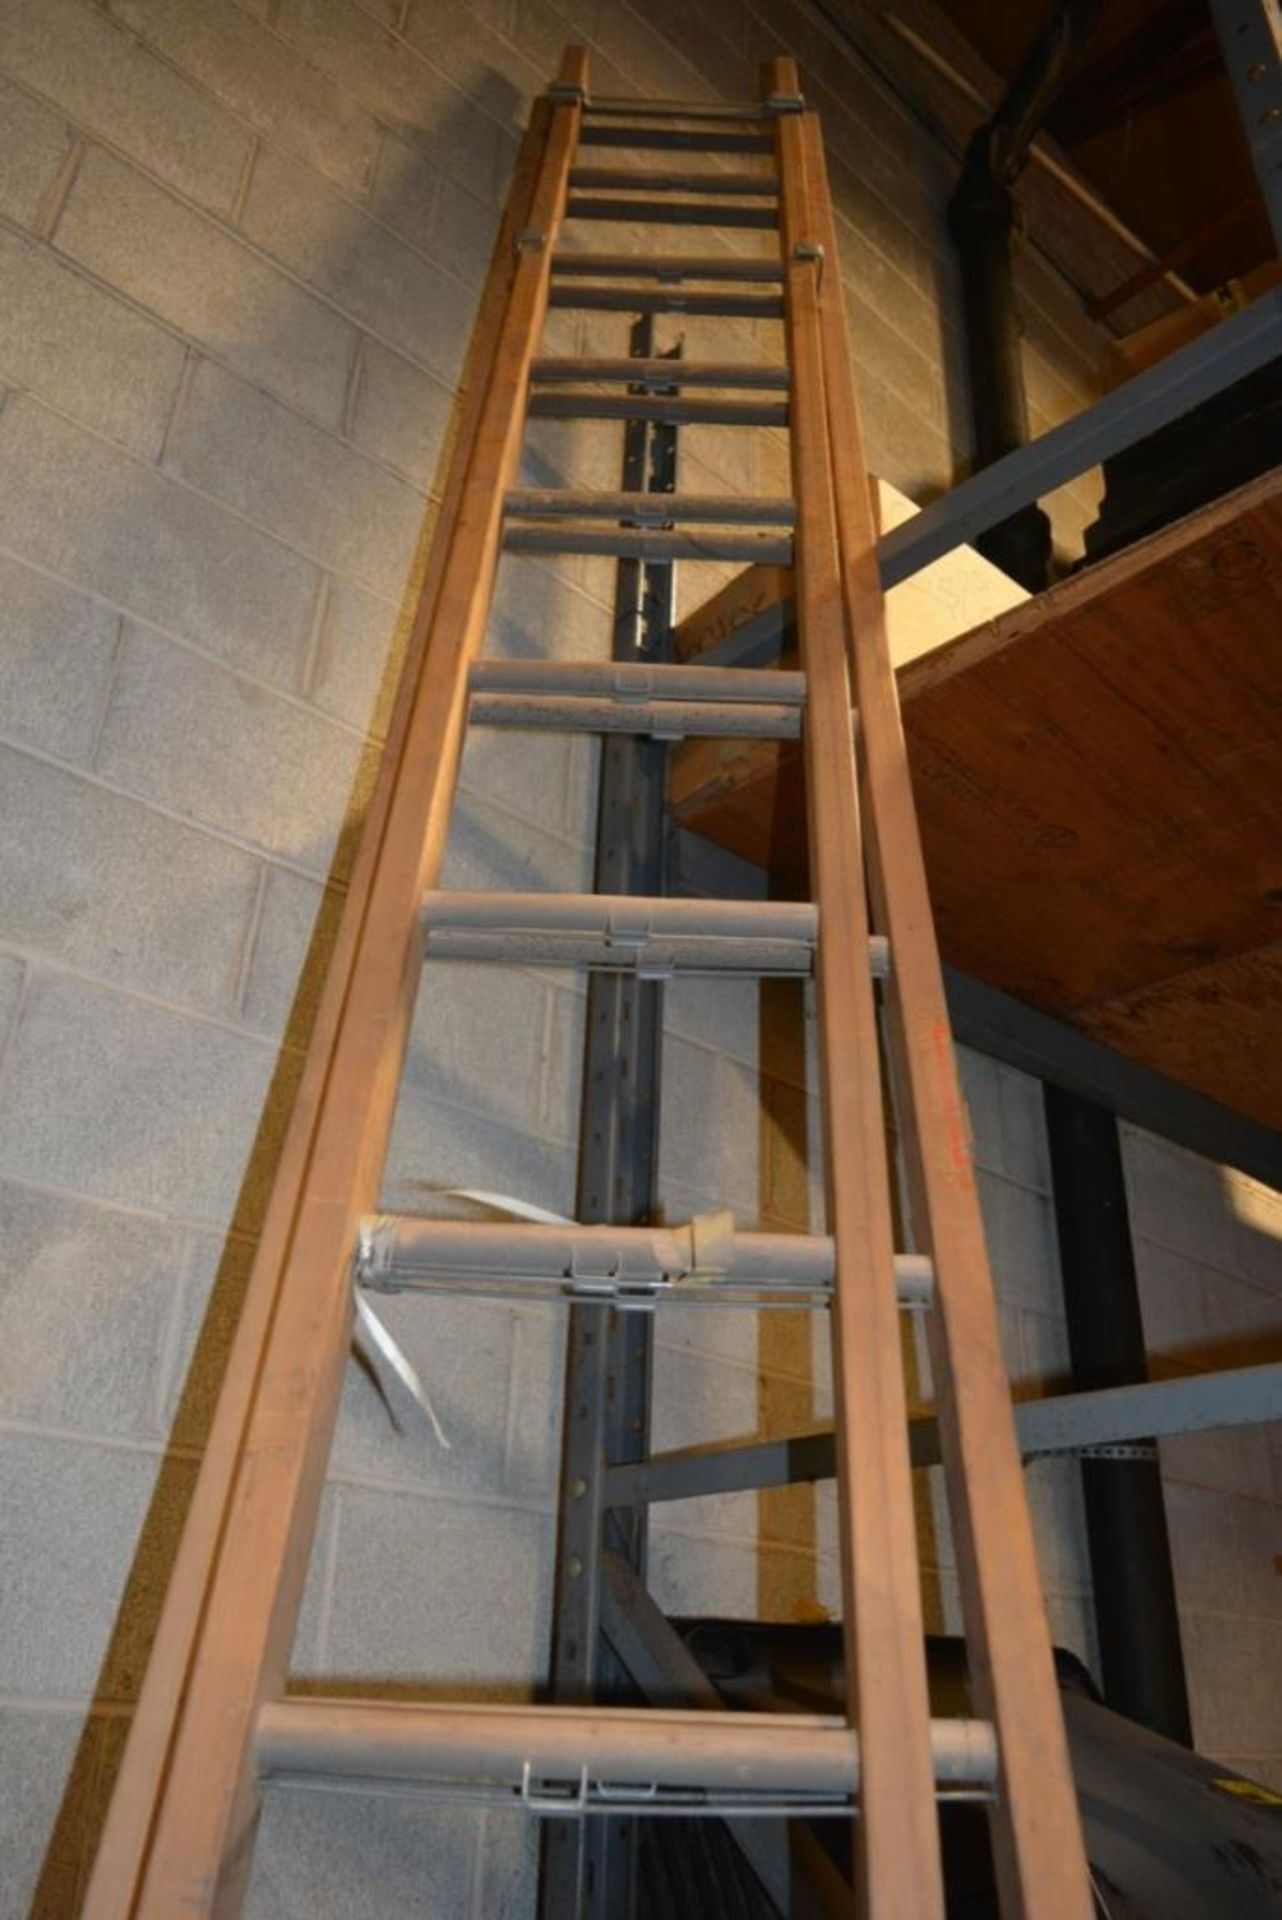 Blue Ribbon 3W394 24' Wood Extention Ladder - Image 5 of 5